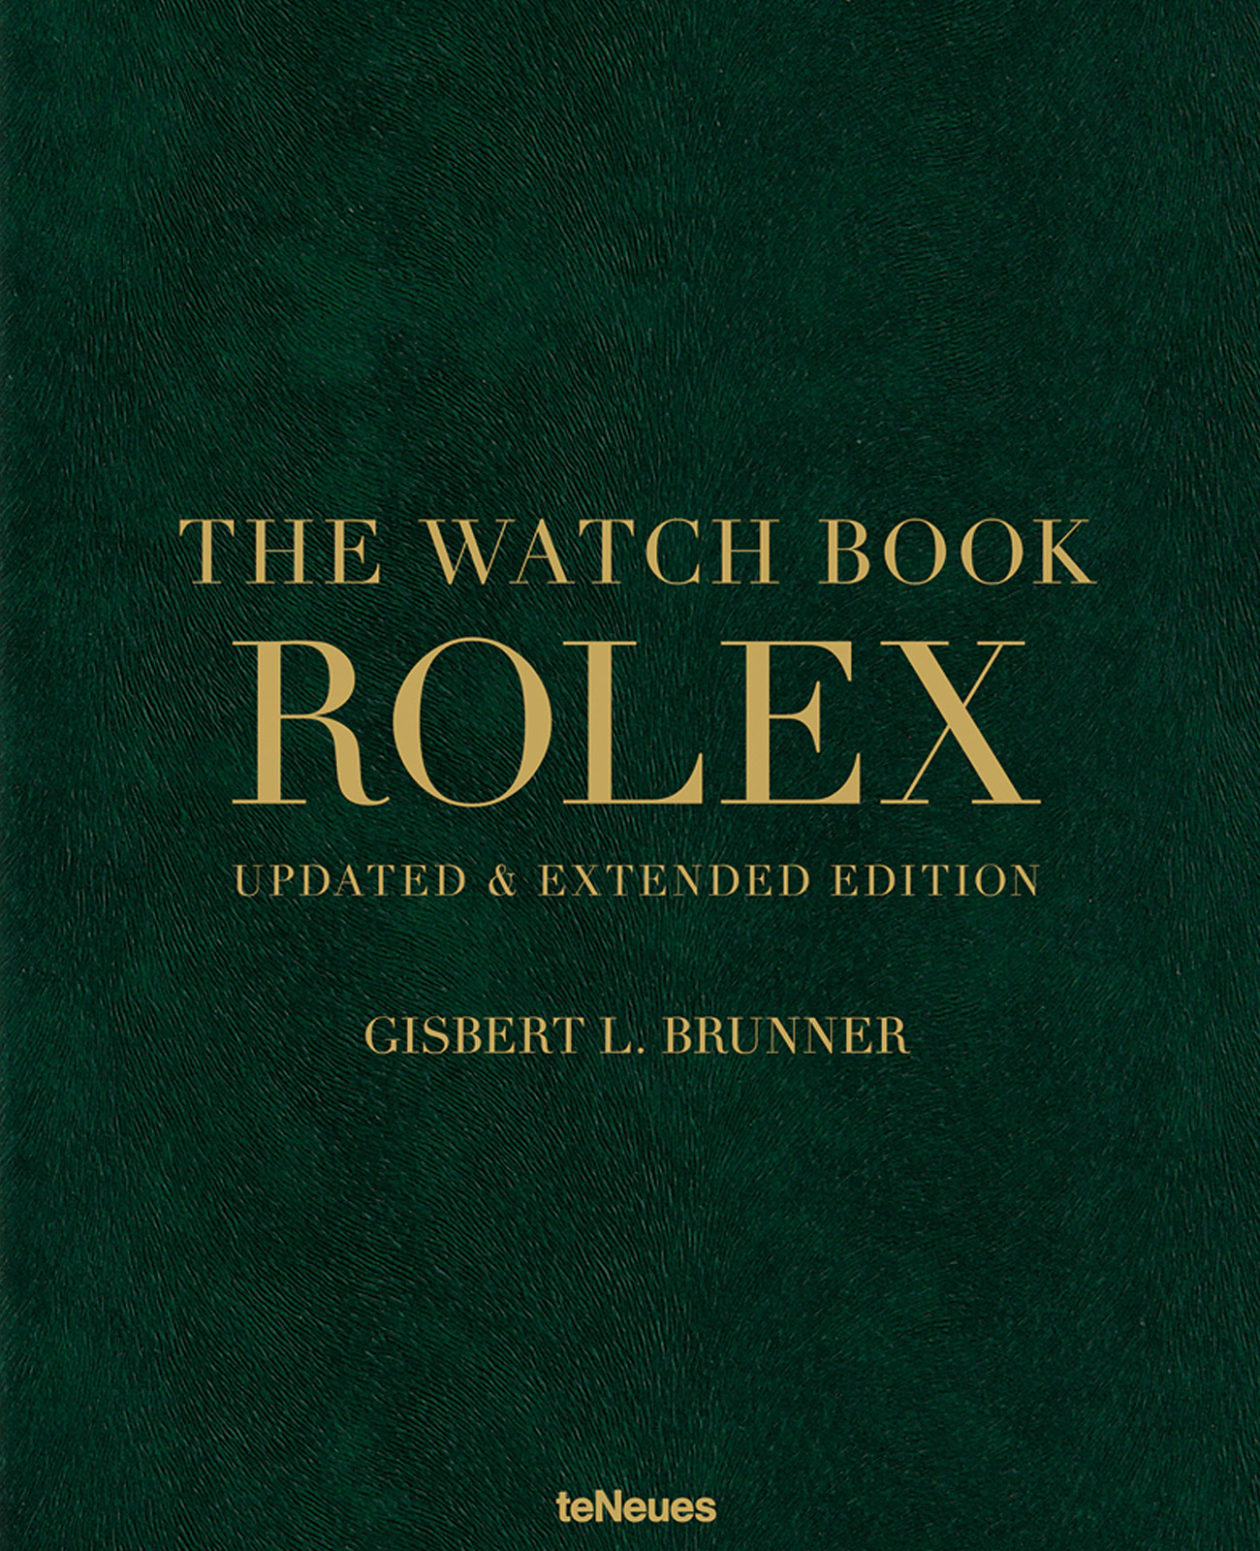 “The Watch Book: Rolex” Updated and Extended Edition